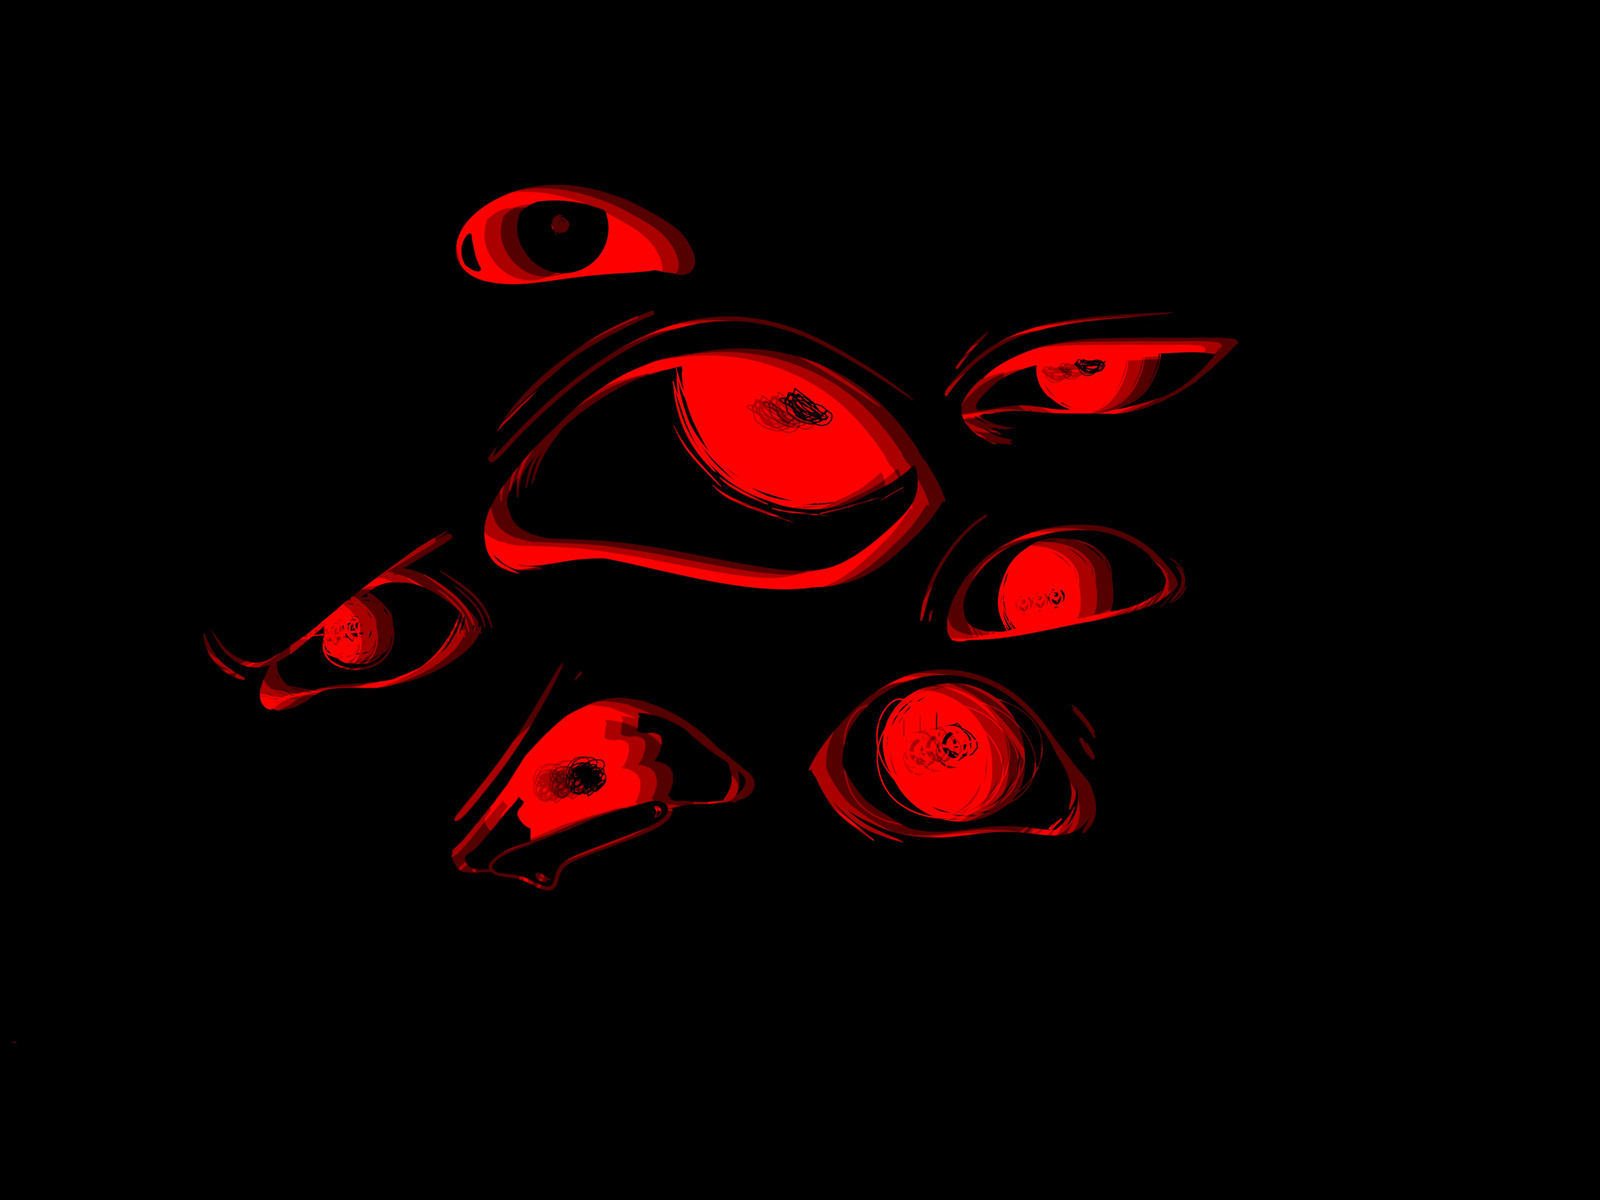 Pictured are seven eyes in red, digitally drawn on a black background